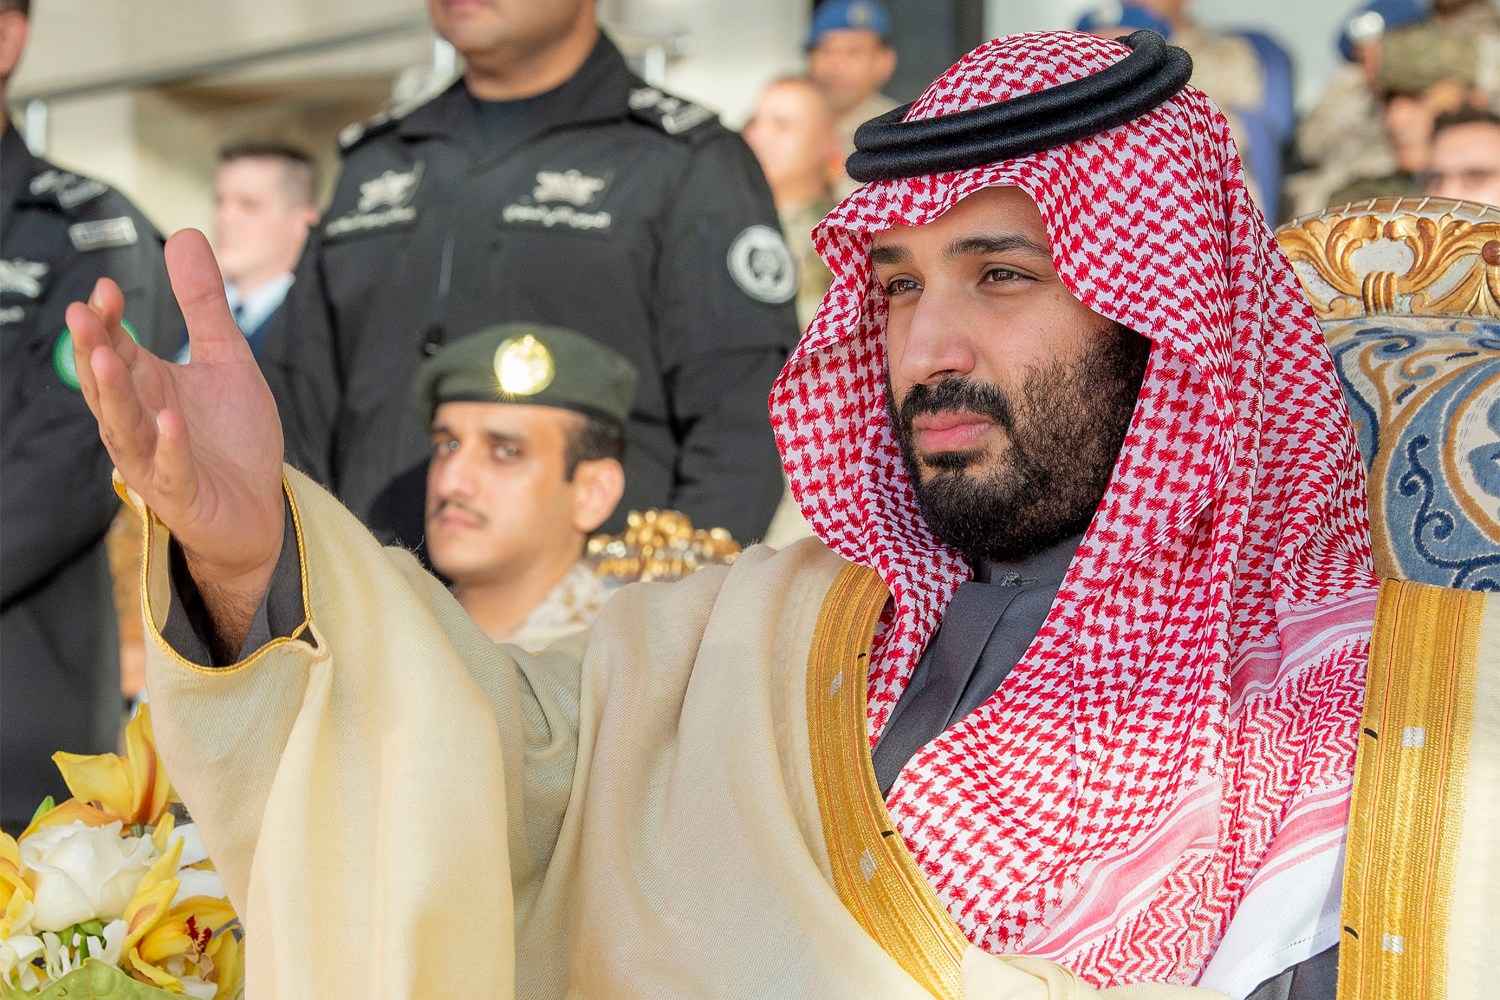 File photo dated December 23, 2018 of Saudi Crown Prince Mohammed bin Salman (also known as MBS) attends a graduation ceremony for Saudi airforce officers at King Faisal Airbase in Tabuk, Saudi Arabia. A US intelligence report has found that Saudi Crown Prince Mohammed bin Salman approved the murder of exiled Saudi journalist Jamal Khashoggi in 2018. The report released by the Biden administration says the prince approved a plan to either "capture or kill" Khashoggi. Photo by Bandar Al Jaloud - Royal Palace / ABACAPRESS.COM